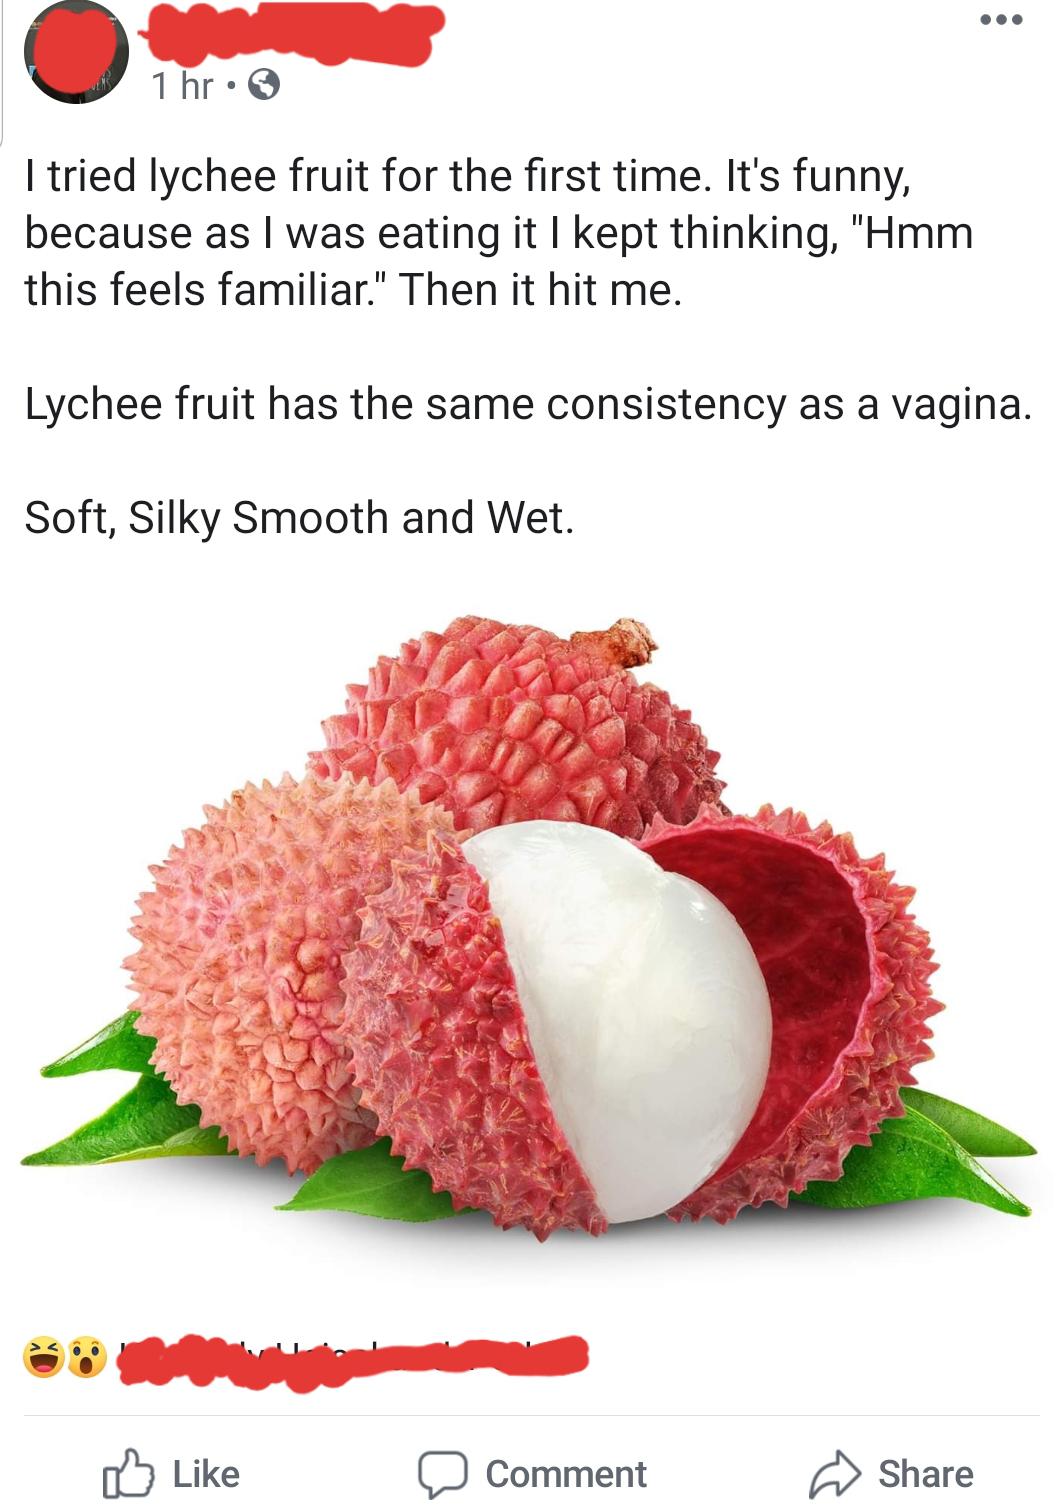 lychee fruit - 1 hr I tried lychee fruit for the first time. It's funny, because as I was eating it I kept thinking, "Hmm this feels familiar." Then it hit me. Lychee fruit has the same consistency as a vagina. Soft, Silky Smooth and Wet. Comment